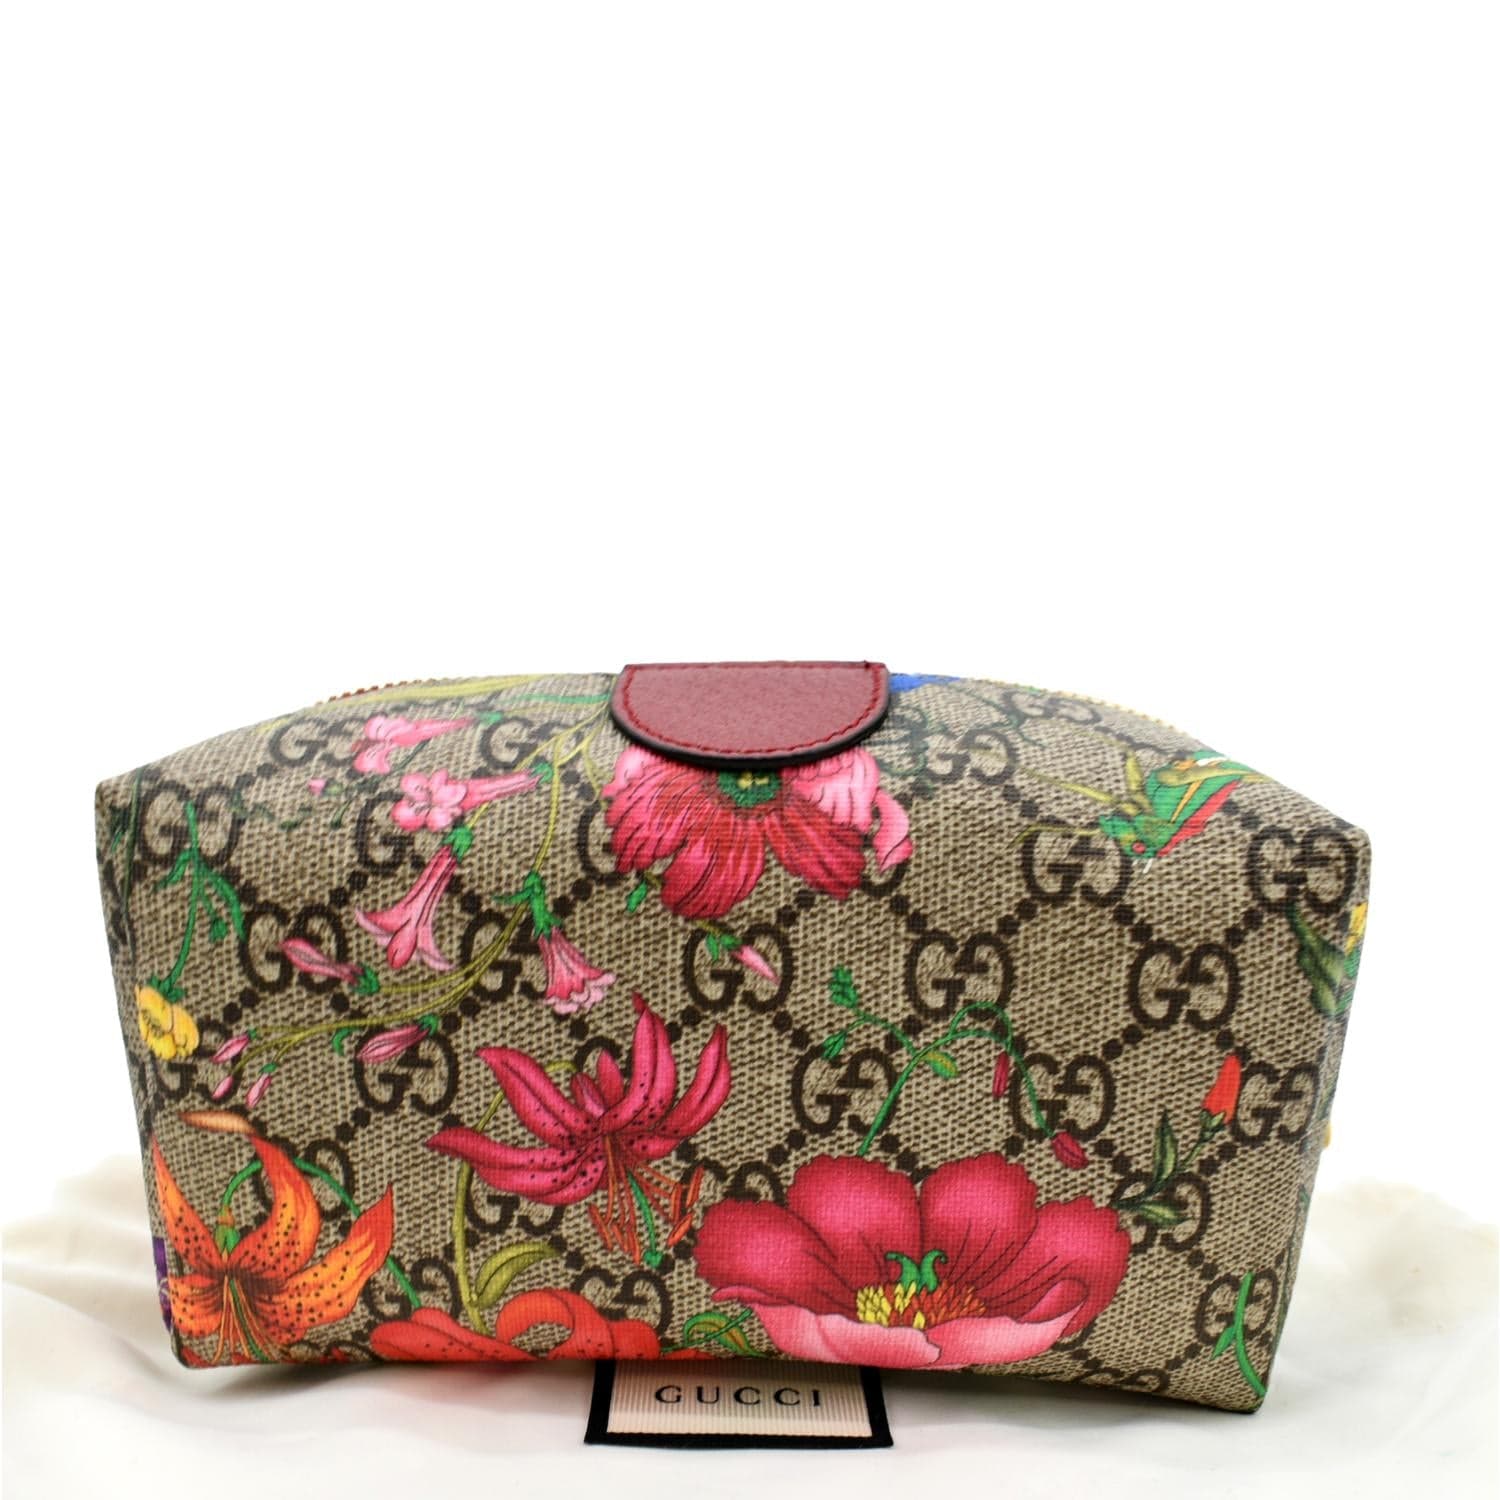 GUCCI Ophidia Floral GG Supreme Monogram Cosmetic Case Red 548394